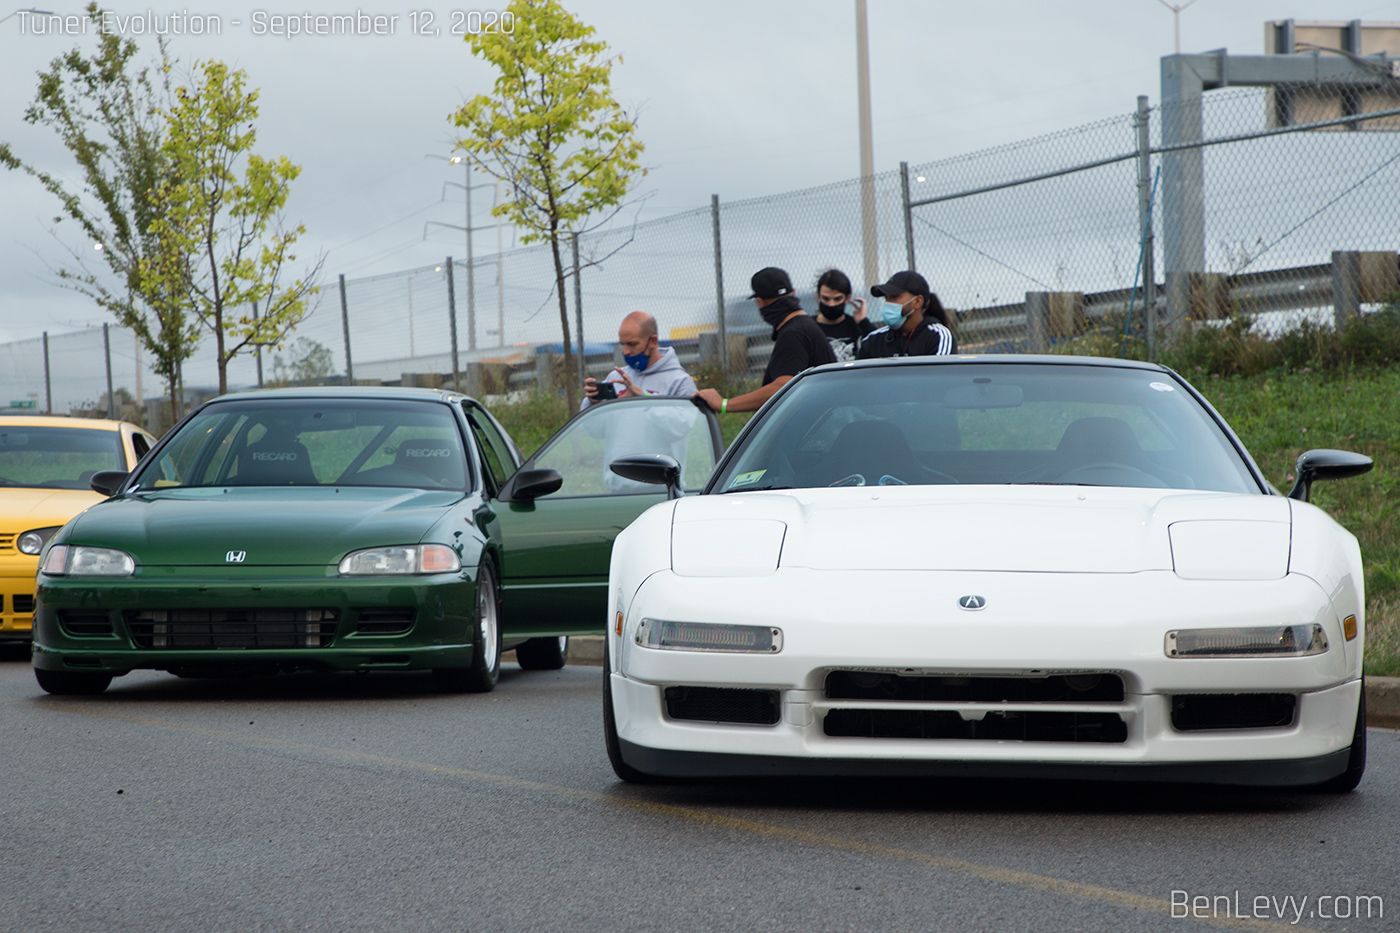 Civic Hatchback and Acura NSX